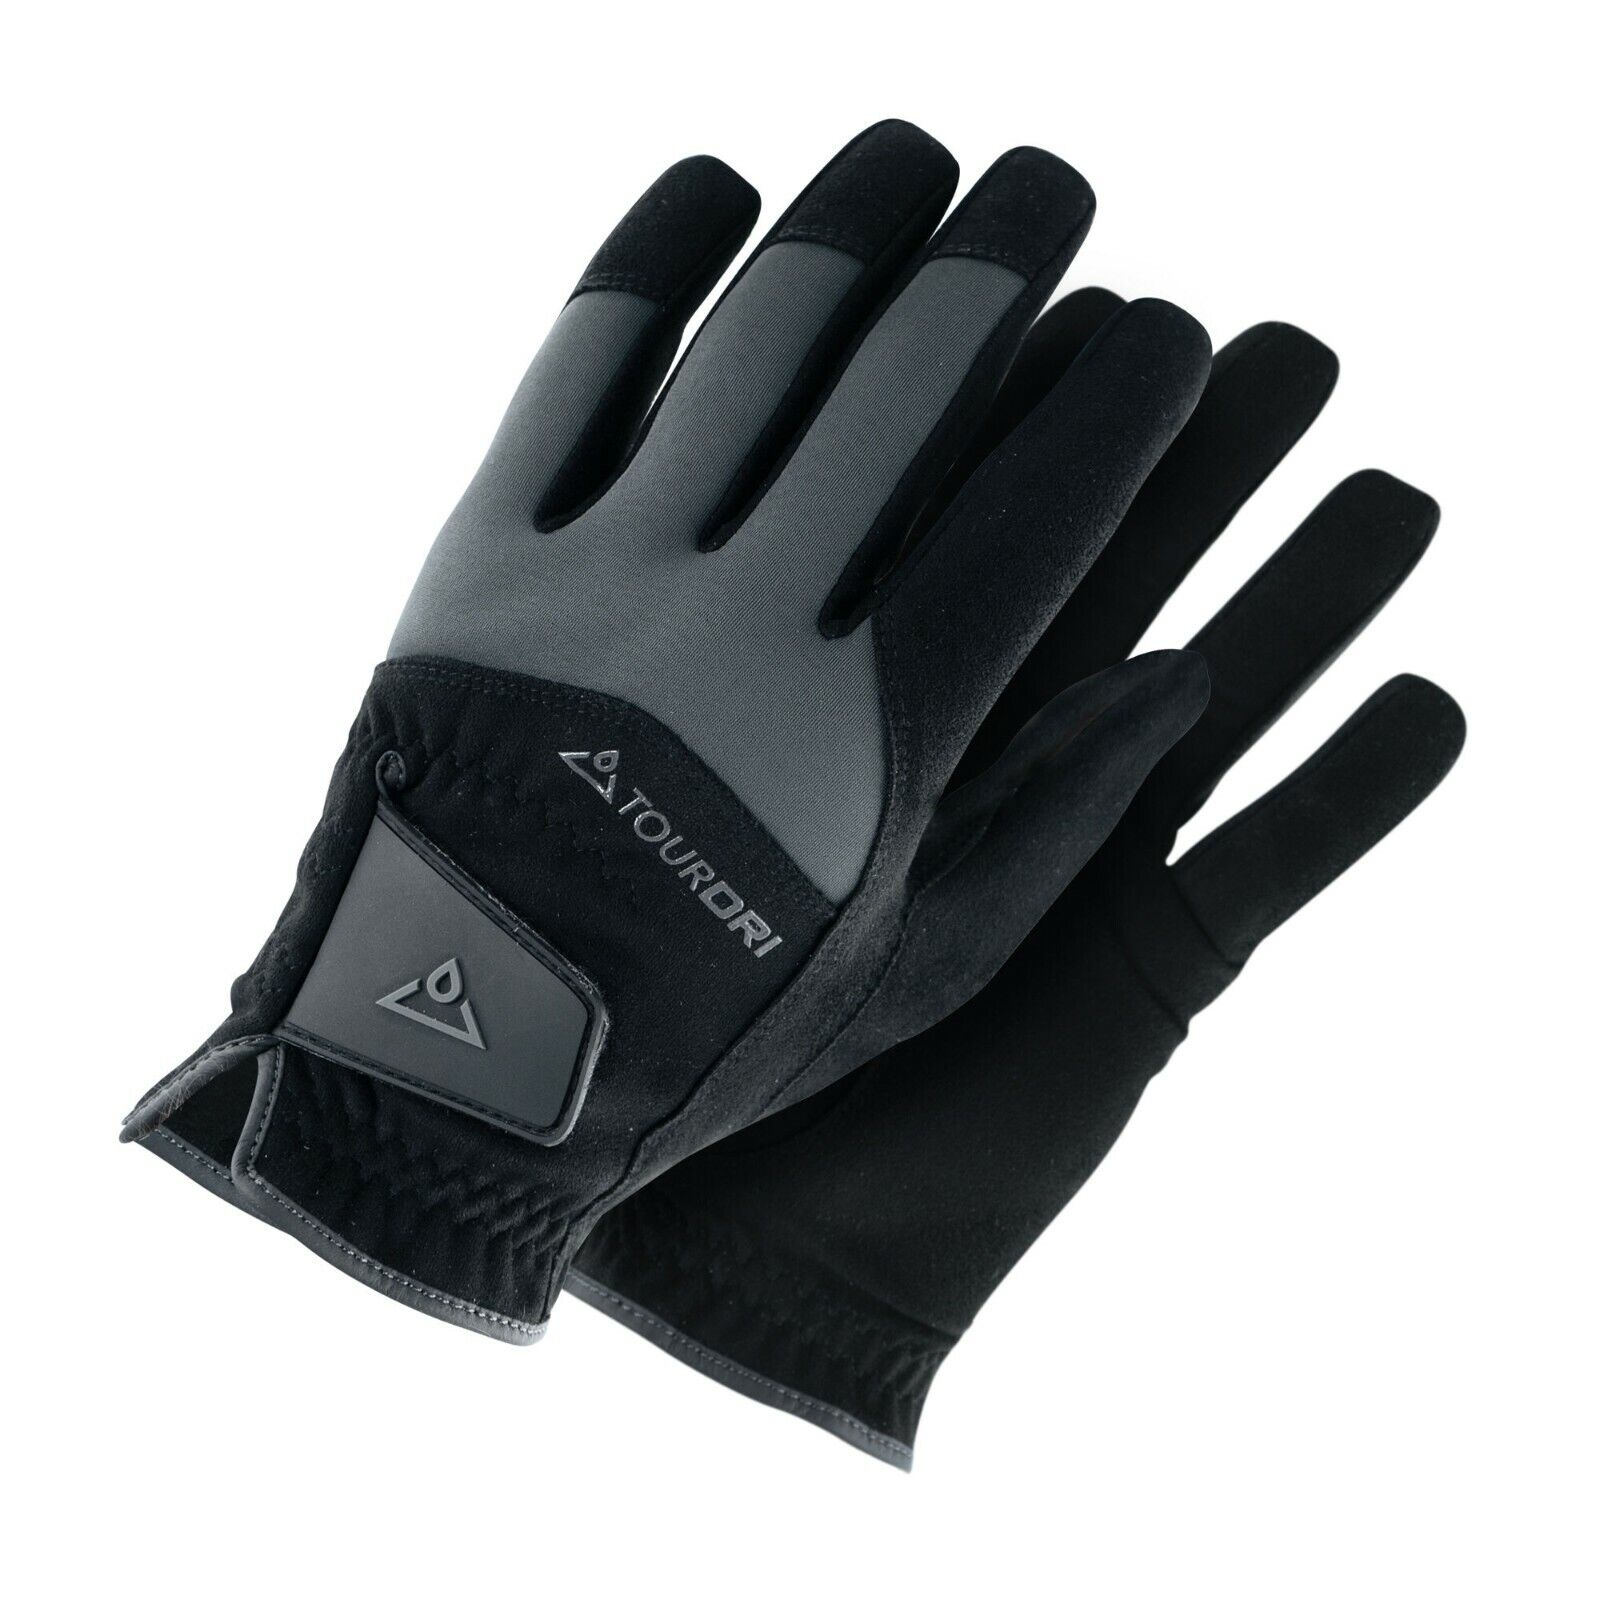 Masters New products, world's highest quality popular! Golf Tourdri Winter Pair Gloves Regular store Mens Size To XL Small